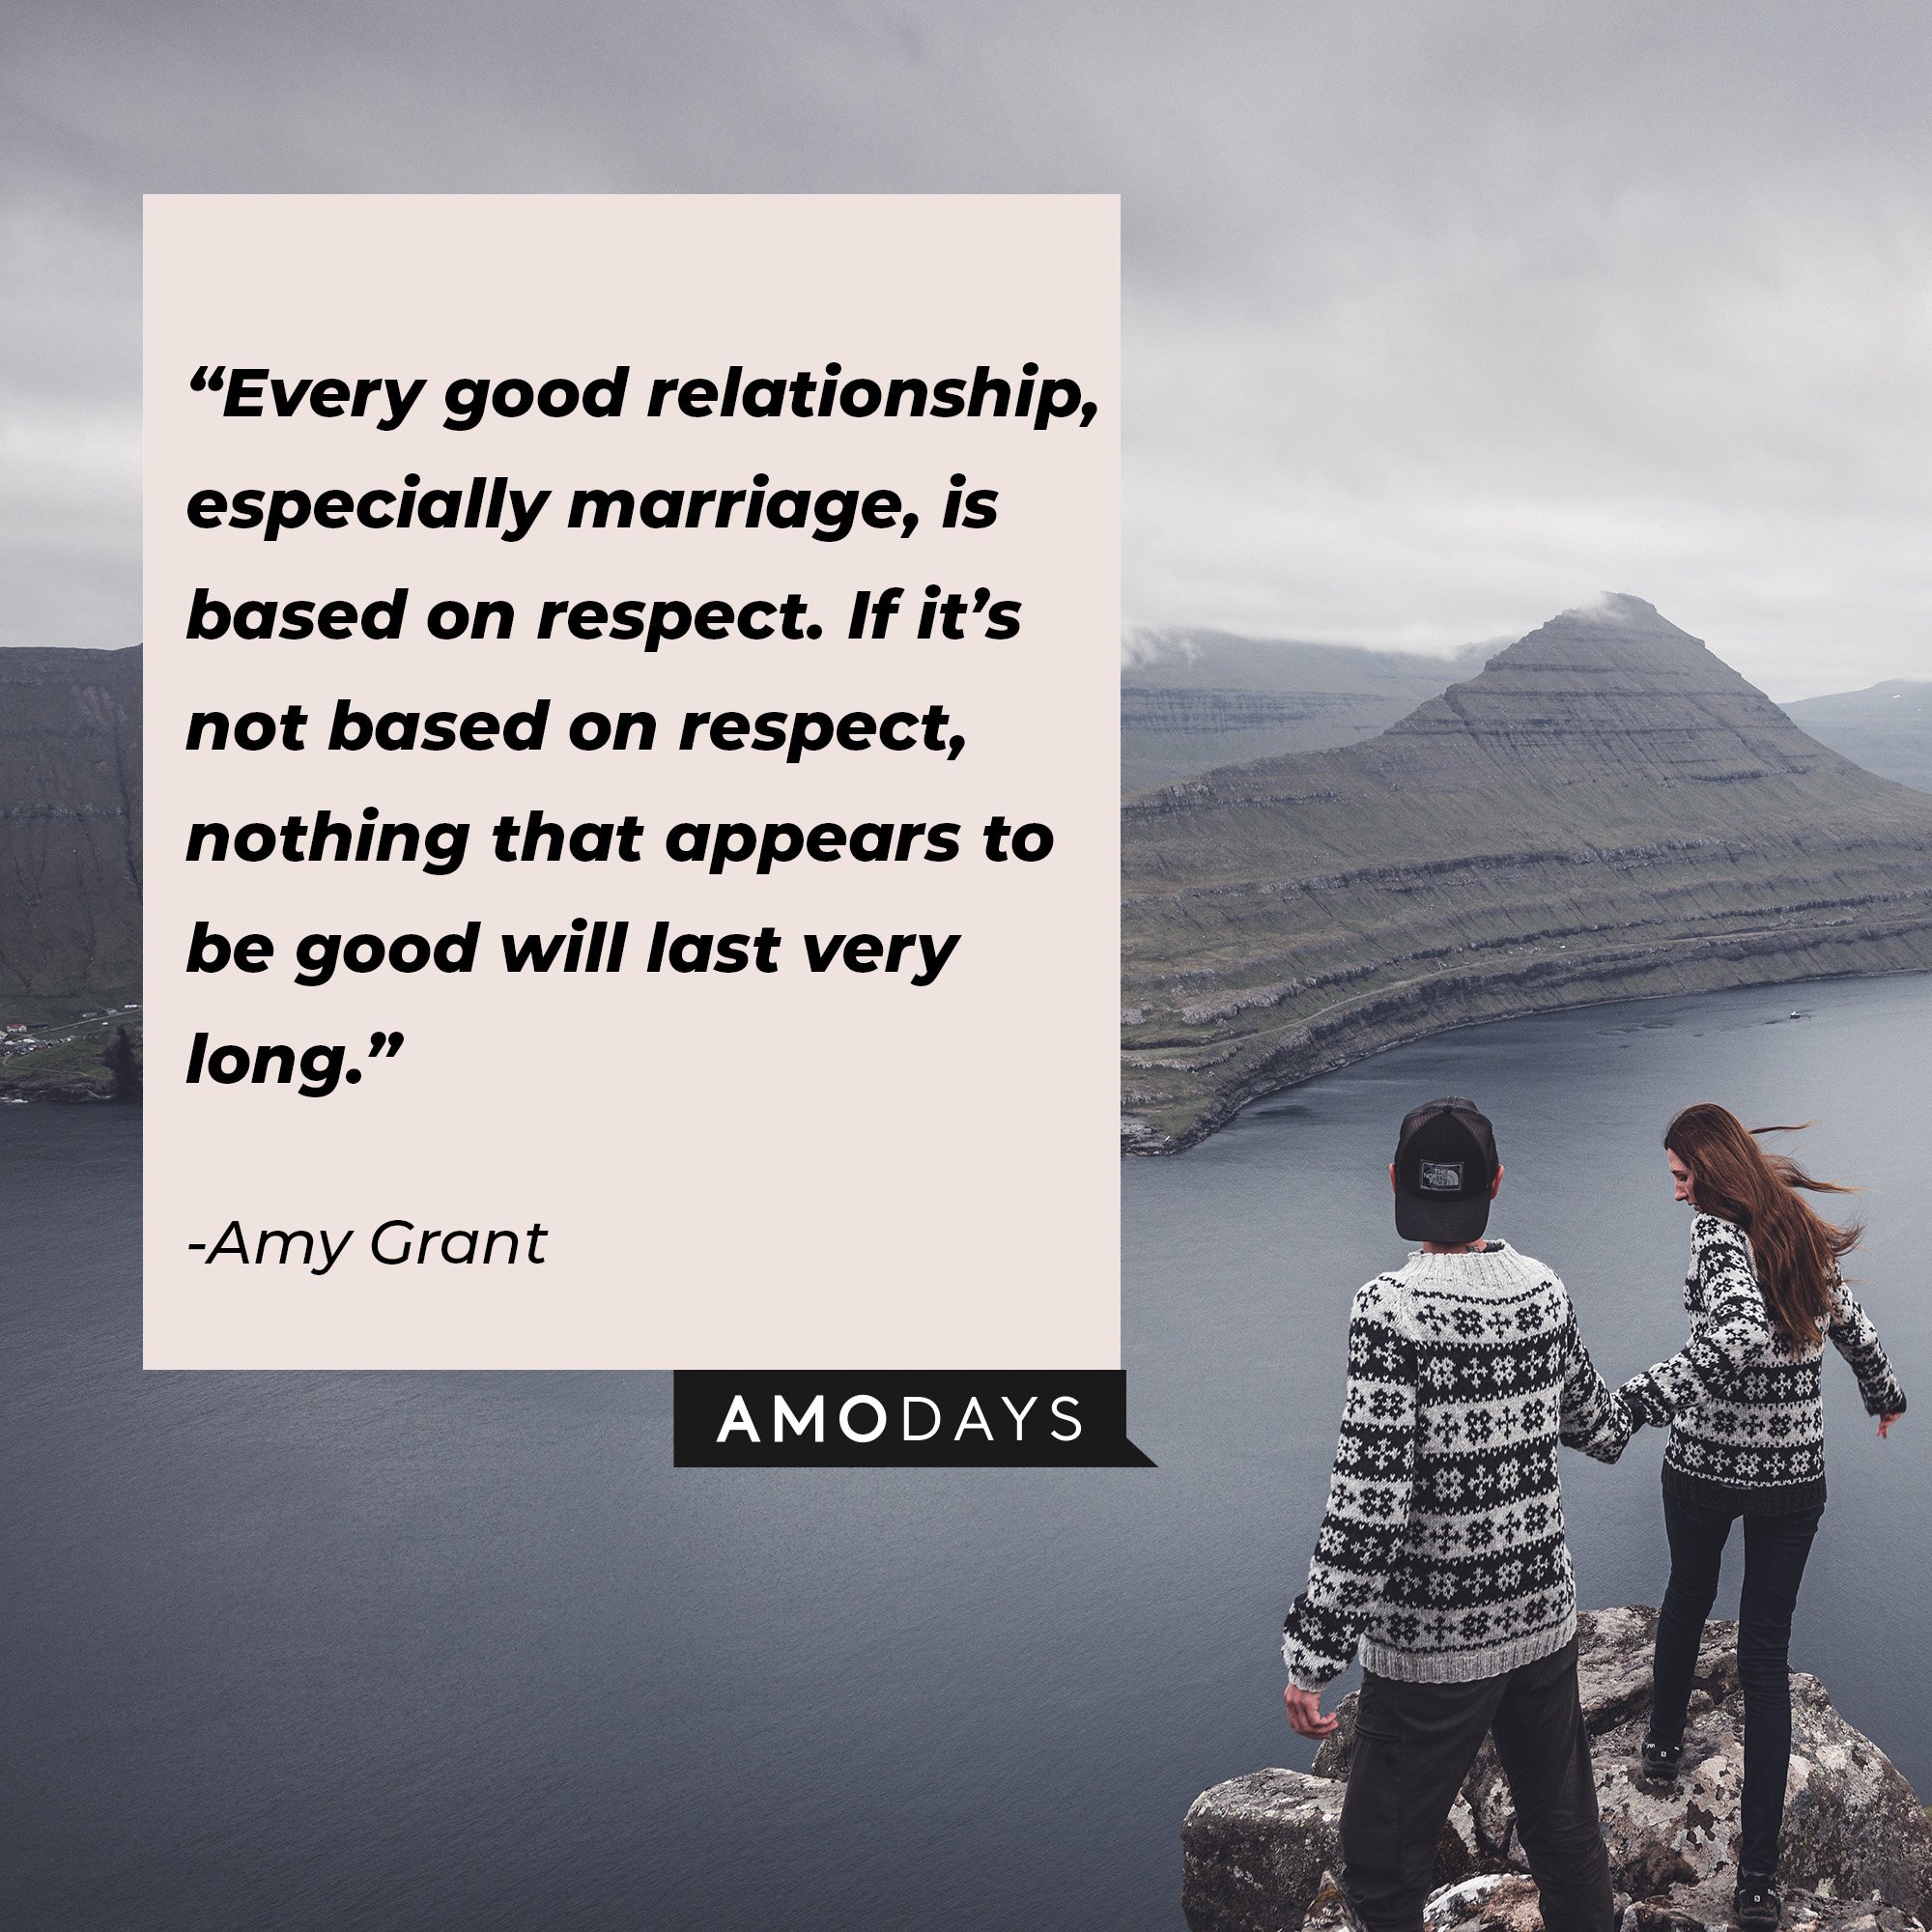  Amy Grant’s quote: “Every good relationship, especially marriage, is based on respect. If it’s not based on respect, nothing that appears to be good will last very long.” | Image: AmoDays  